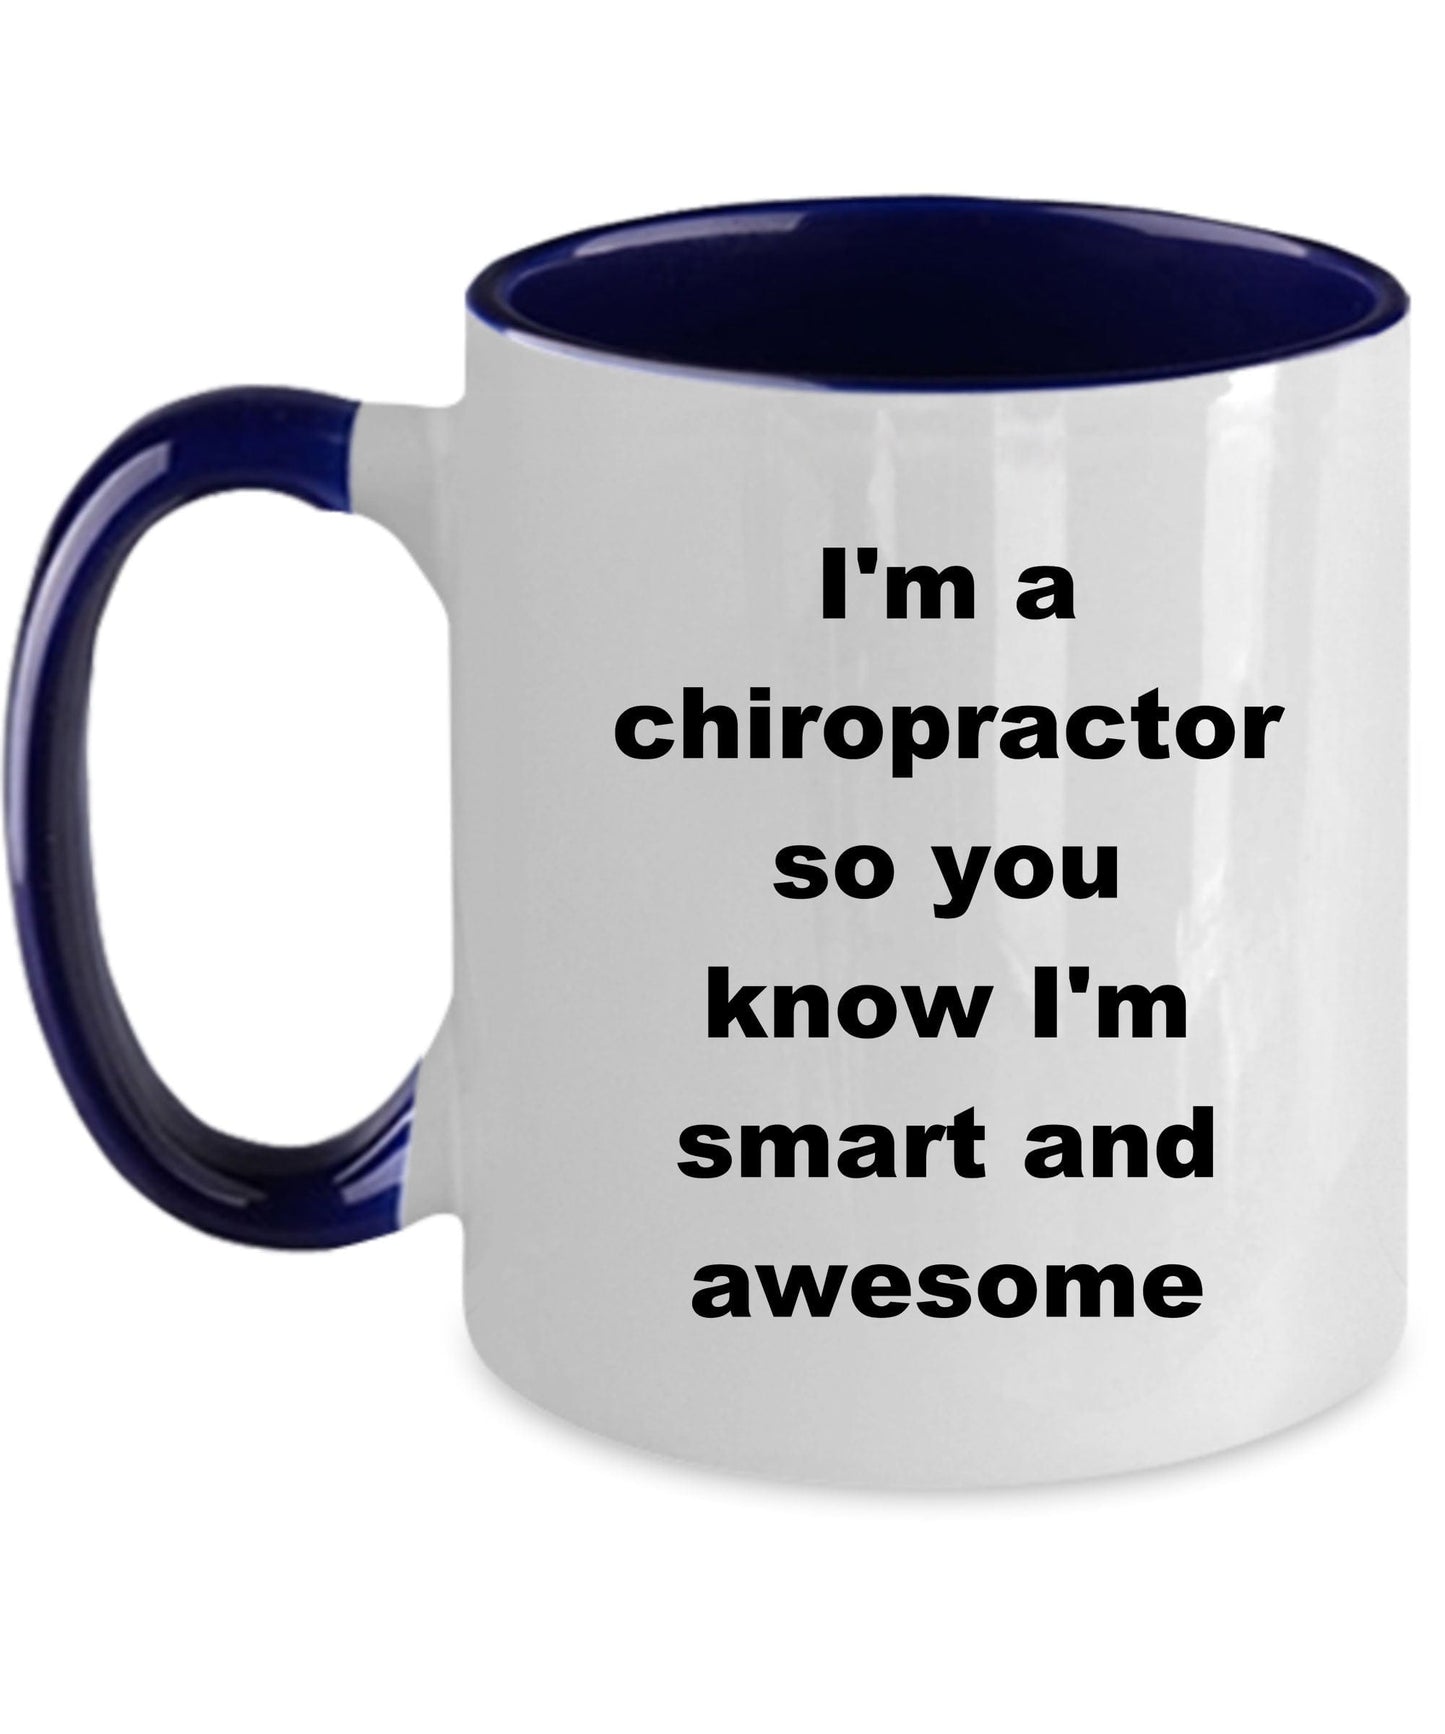 Chiropractor Custom Ceramic Coffee Mug - I'm a chiropractor so you know I'm smart and awesome